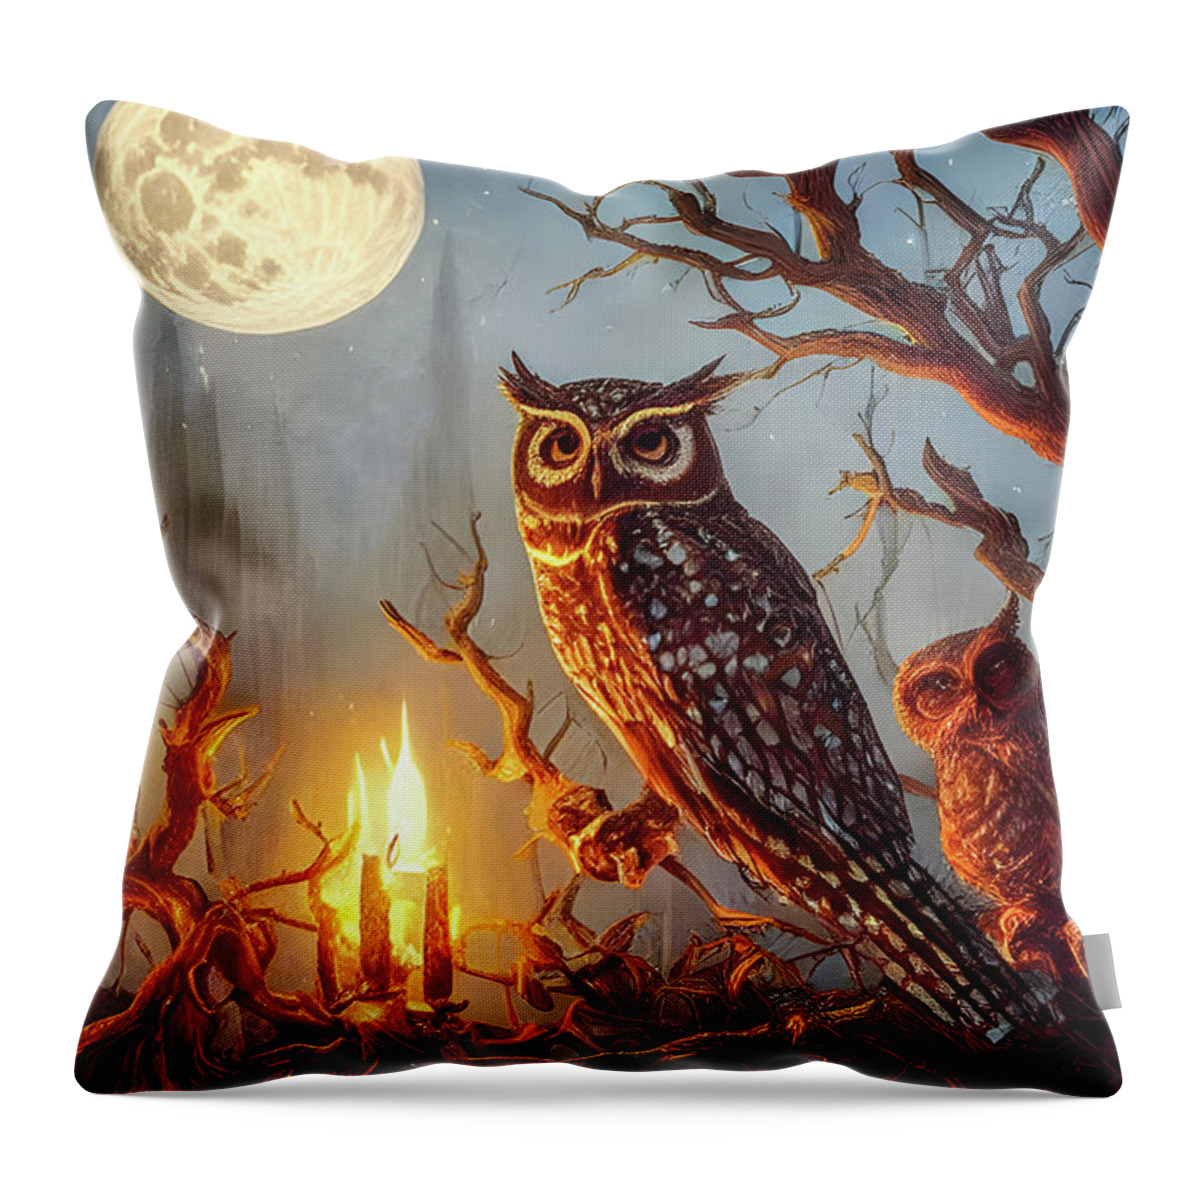 Owls Throw Pillow featuring the painting Maine Parliament of Owls by Bob Orsillo